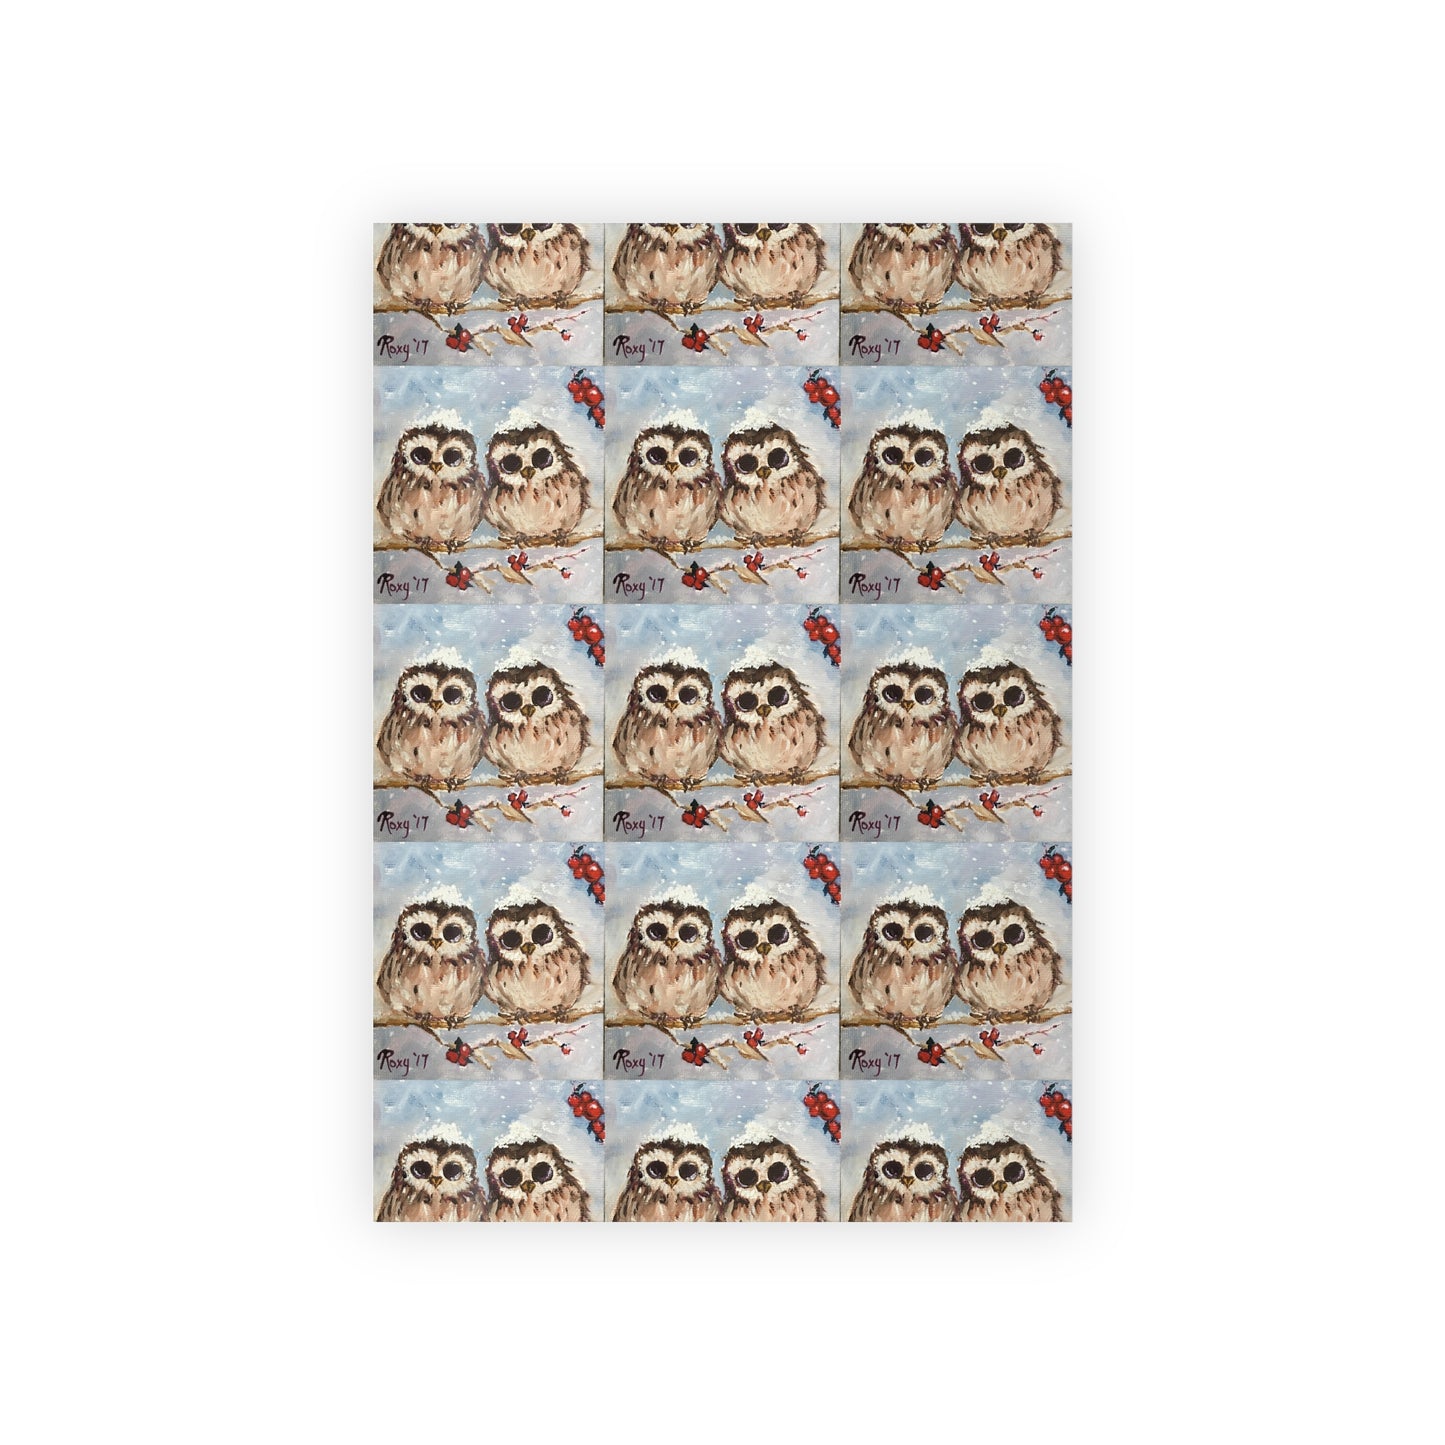 Adorable Baby Owls in a Snowy Berry Tree Gift Wrapping Paper  1pc